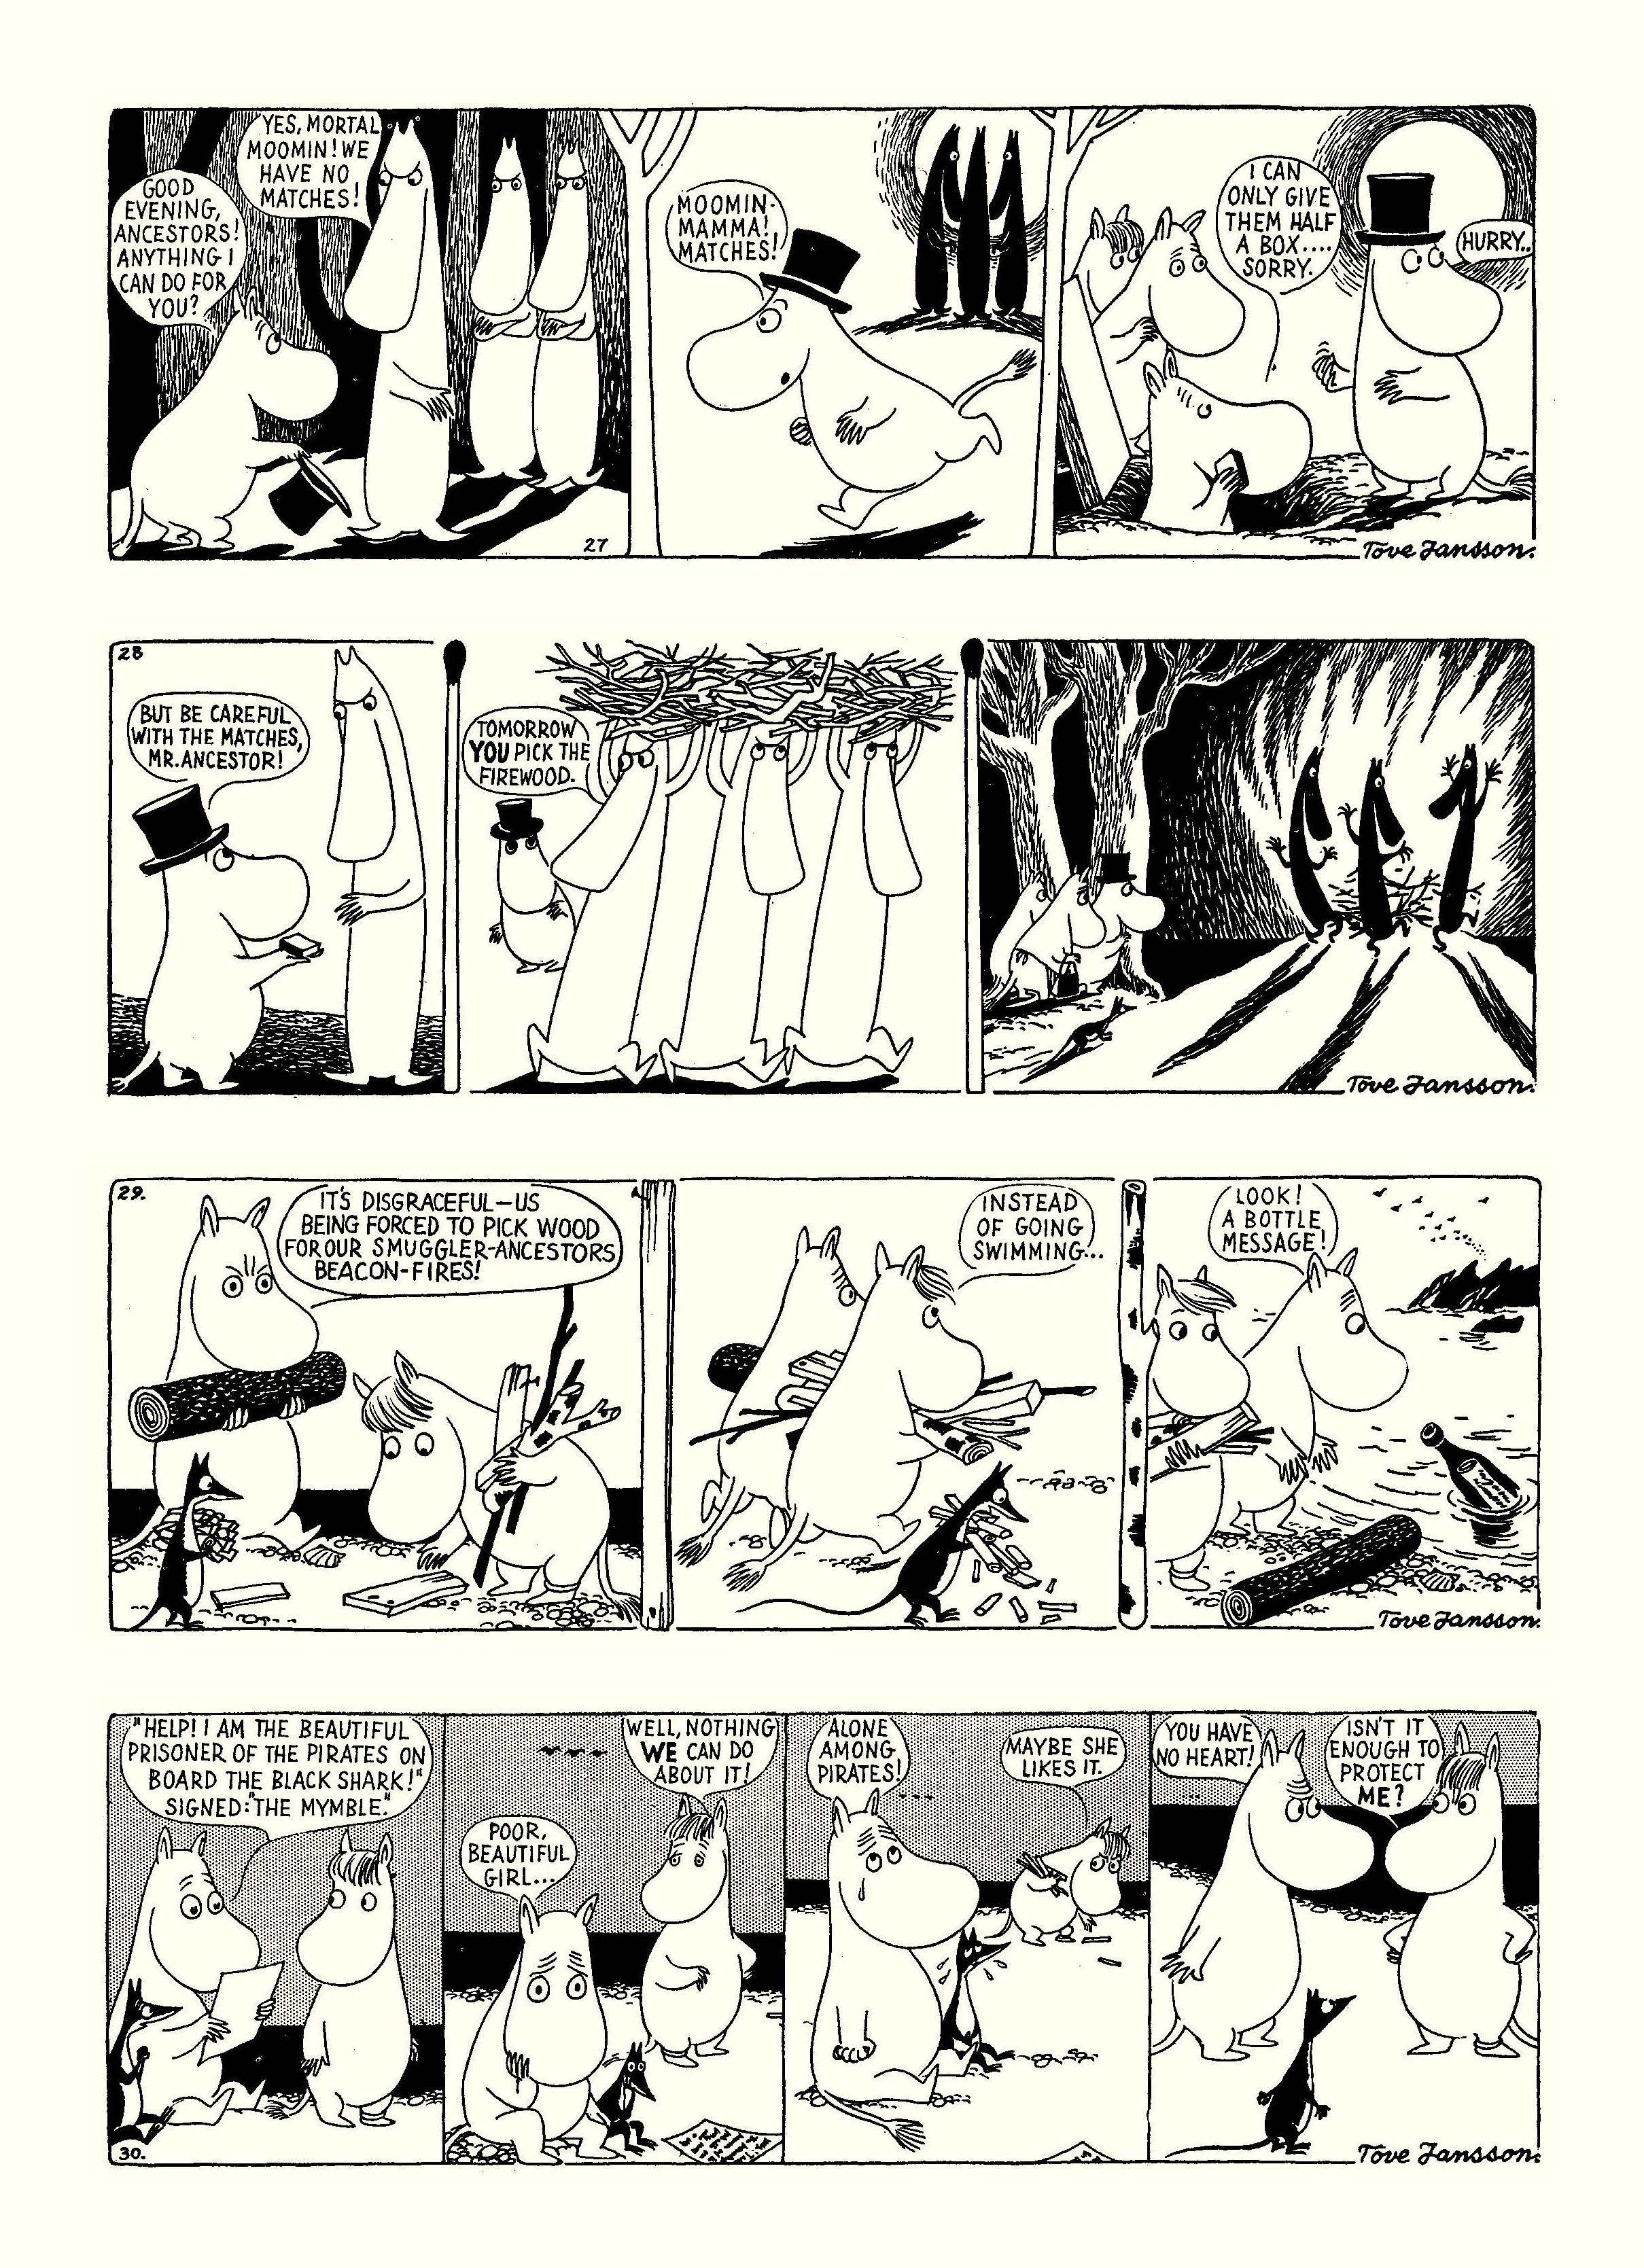 Read online Moomin: The Complete Tove Jansson Comic Strip comic -  Issue # TPB 1 - 77